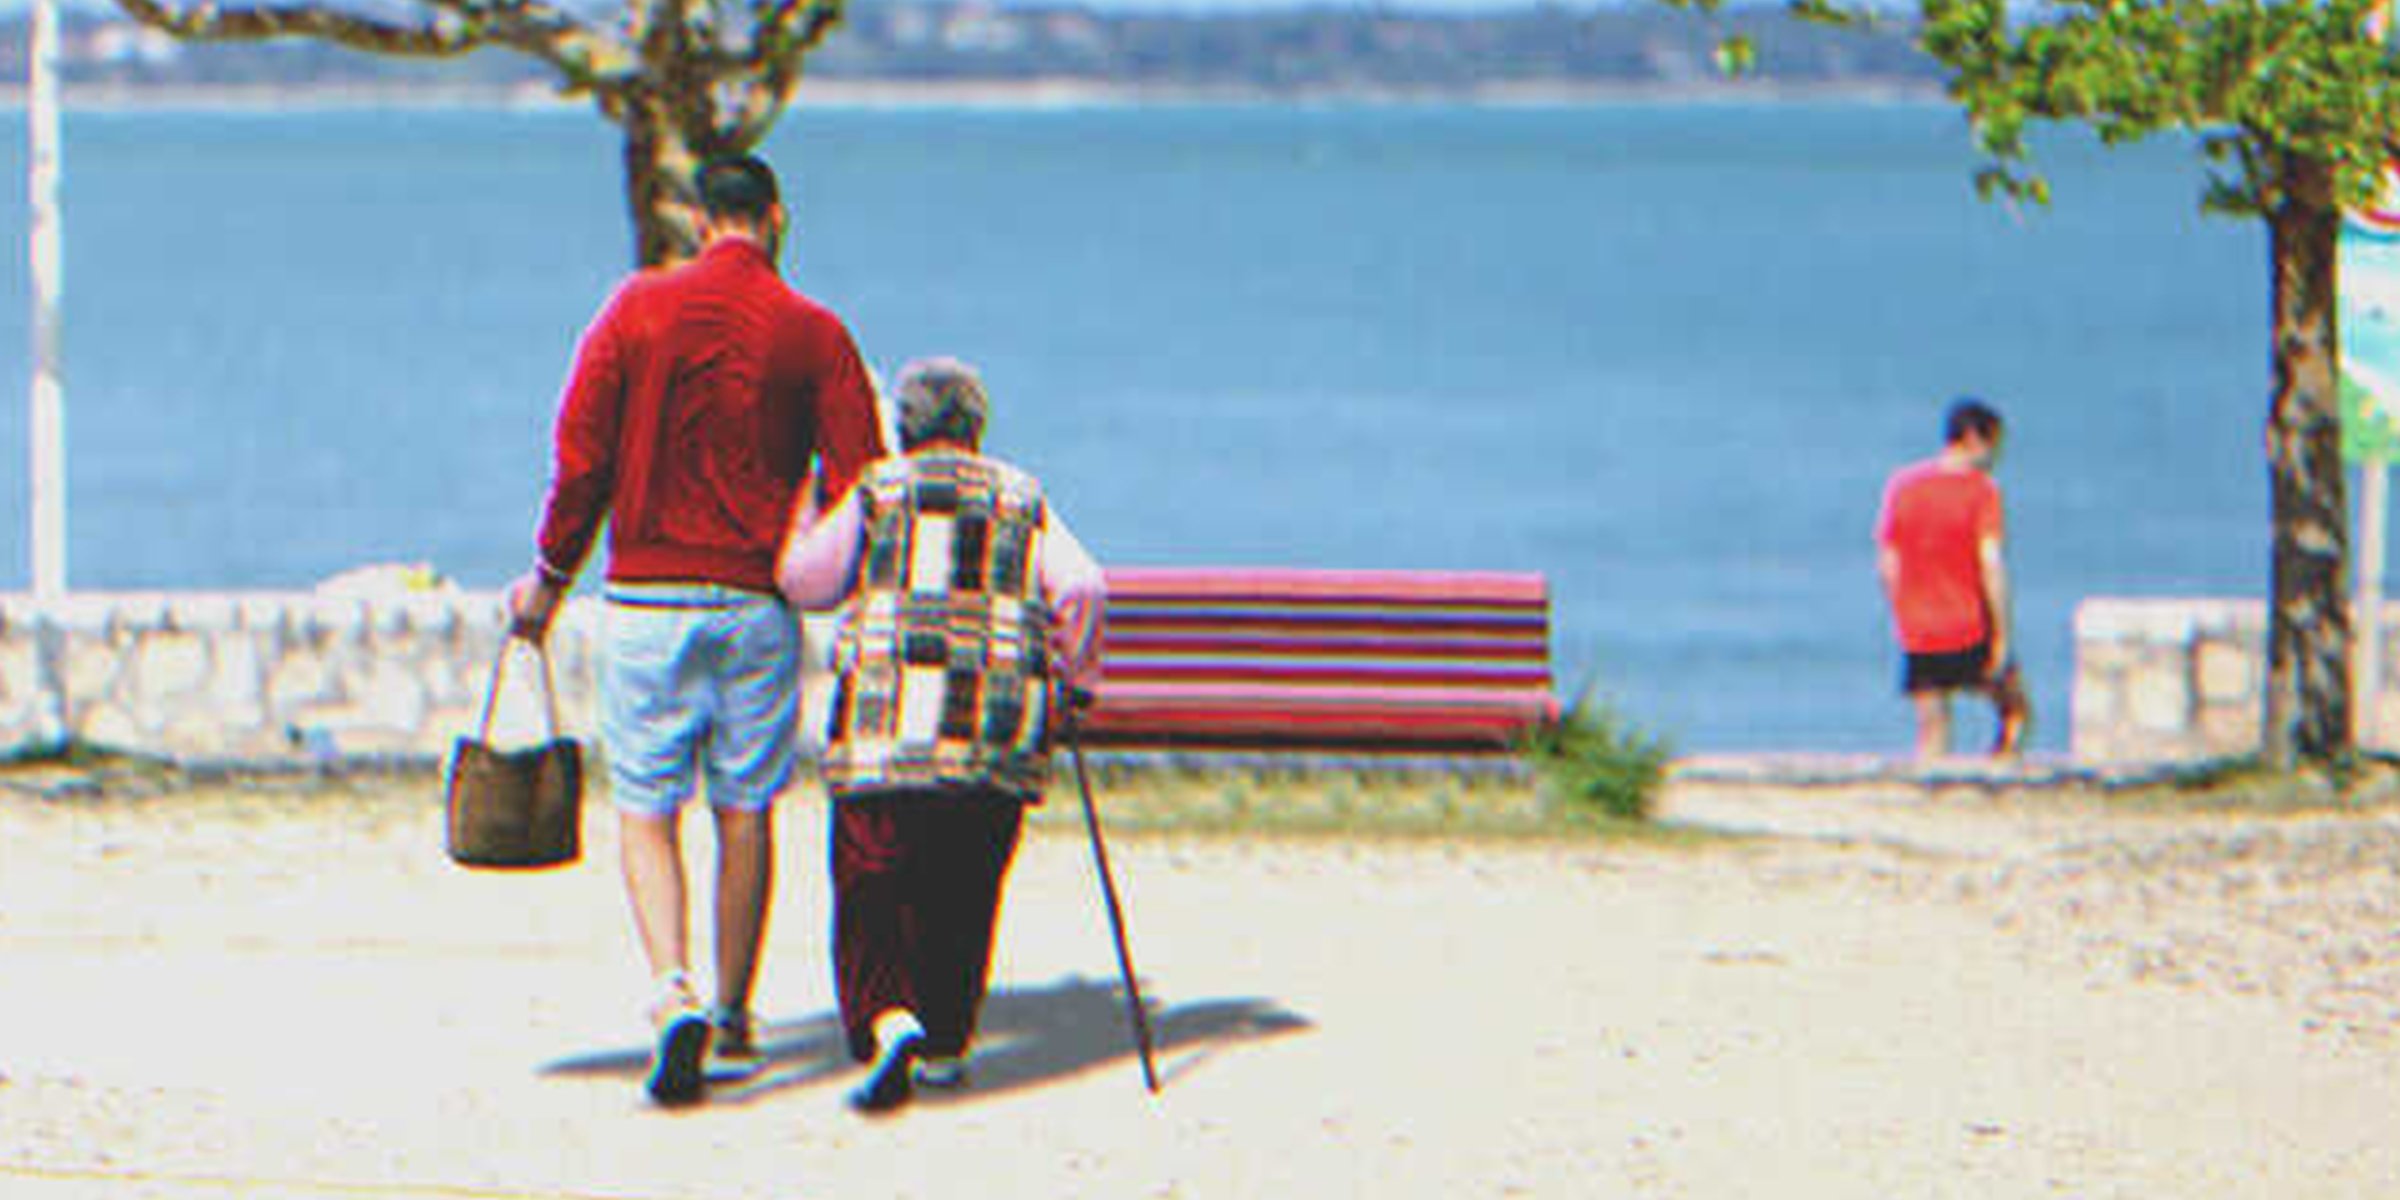 A man and an old lady walking towards the sea | Source: Shutterstock